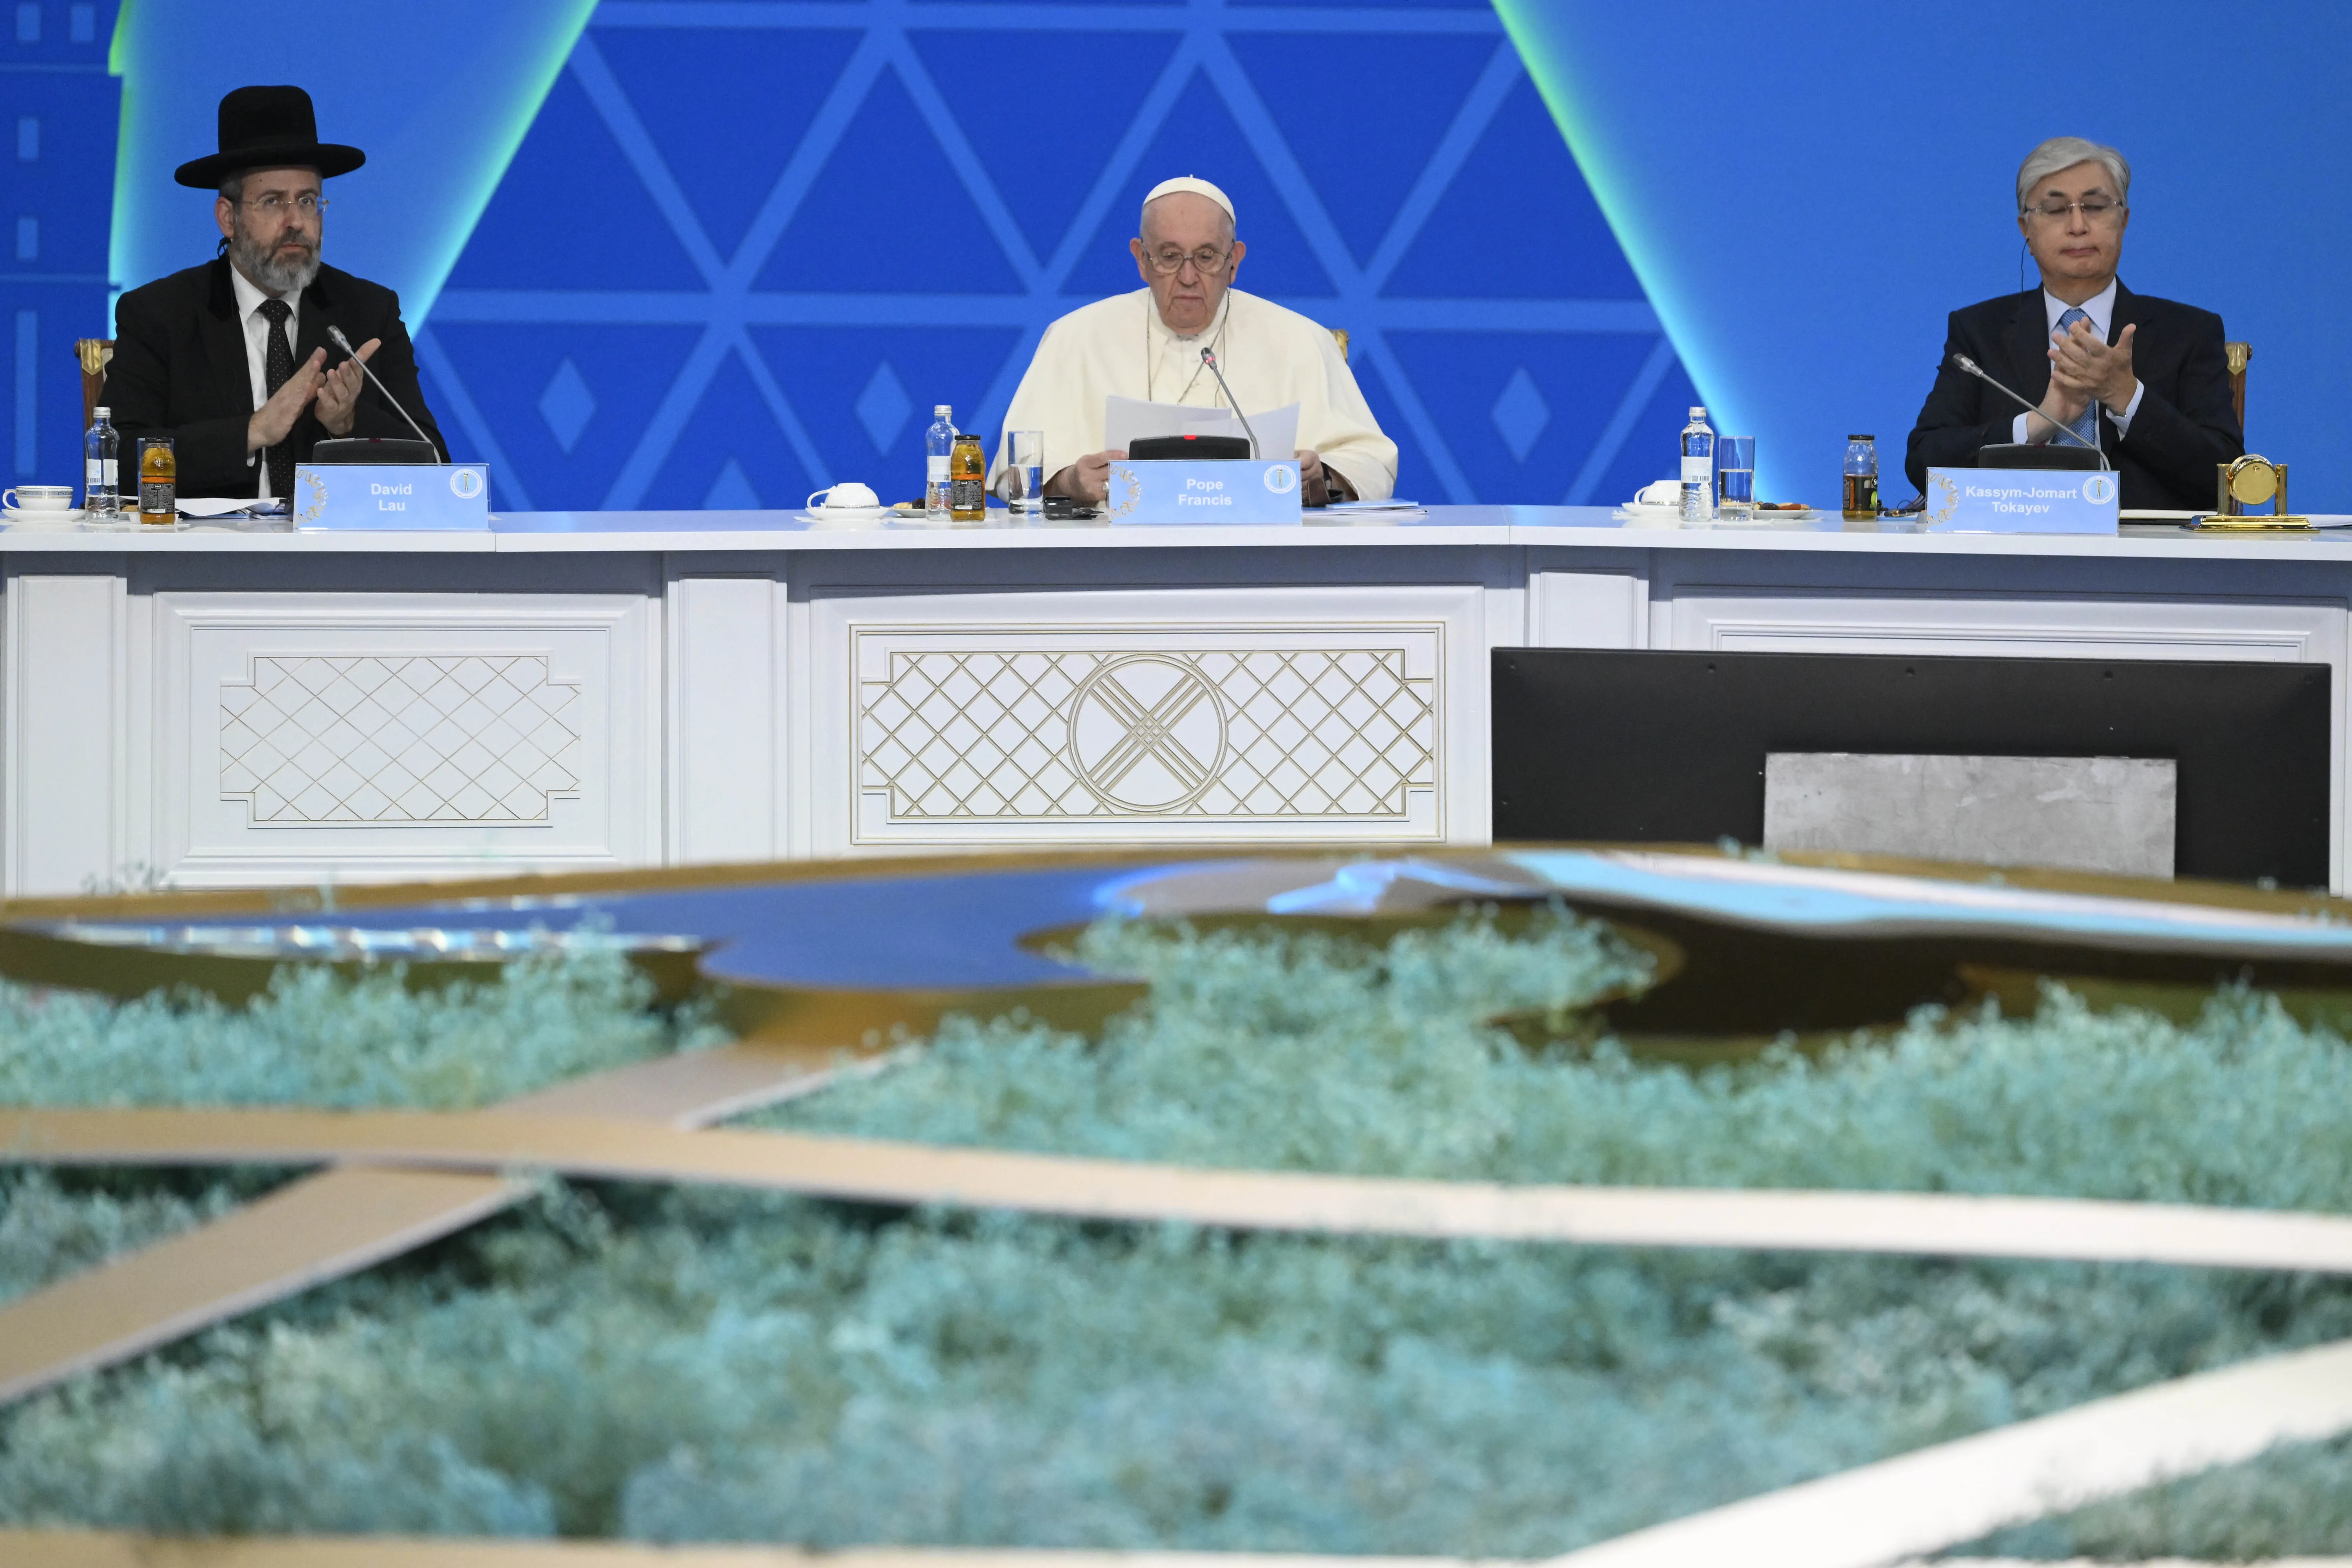 Pope Francis speaking at the Seventh Congress of Leaders of World and Traditional Religions in Nur-Sultan (Astana), Kazakhstan, Sept. 13–15, 2022.?w=200&h=150